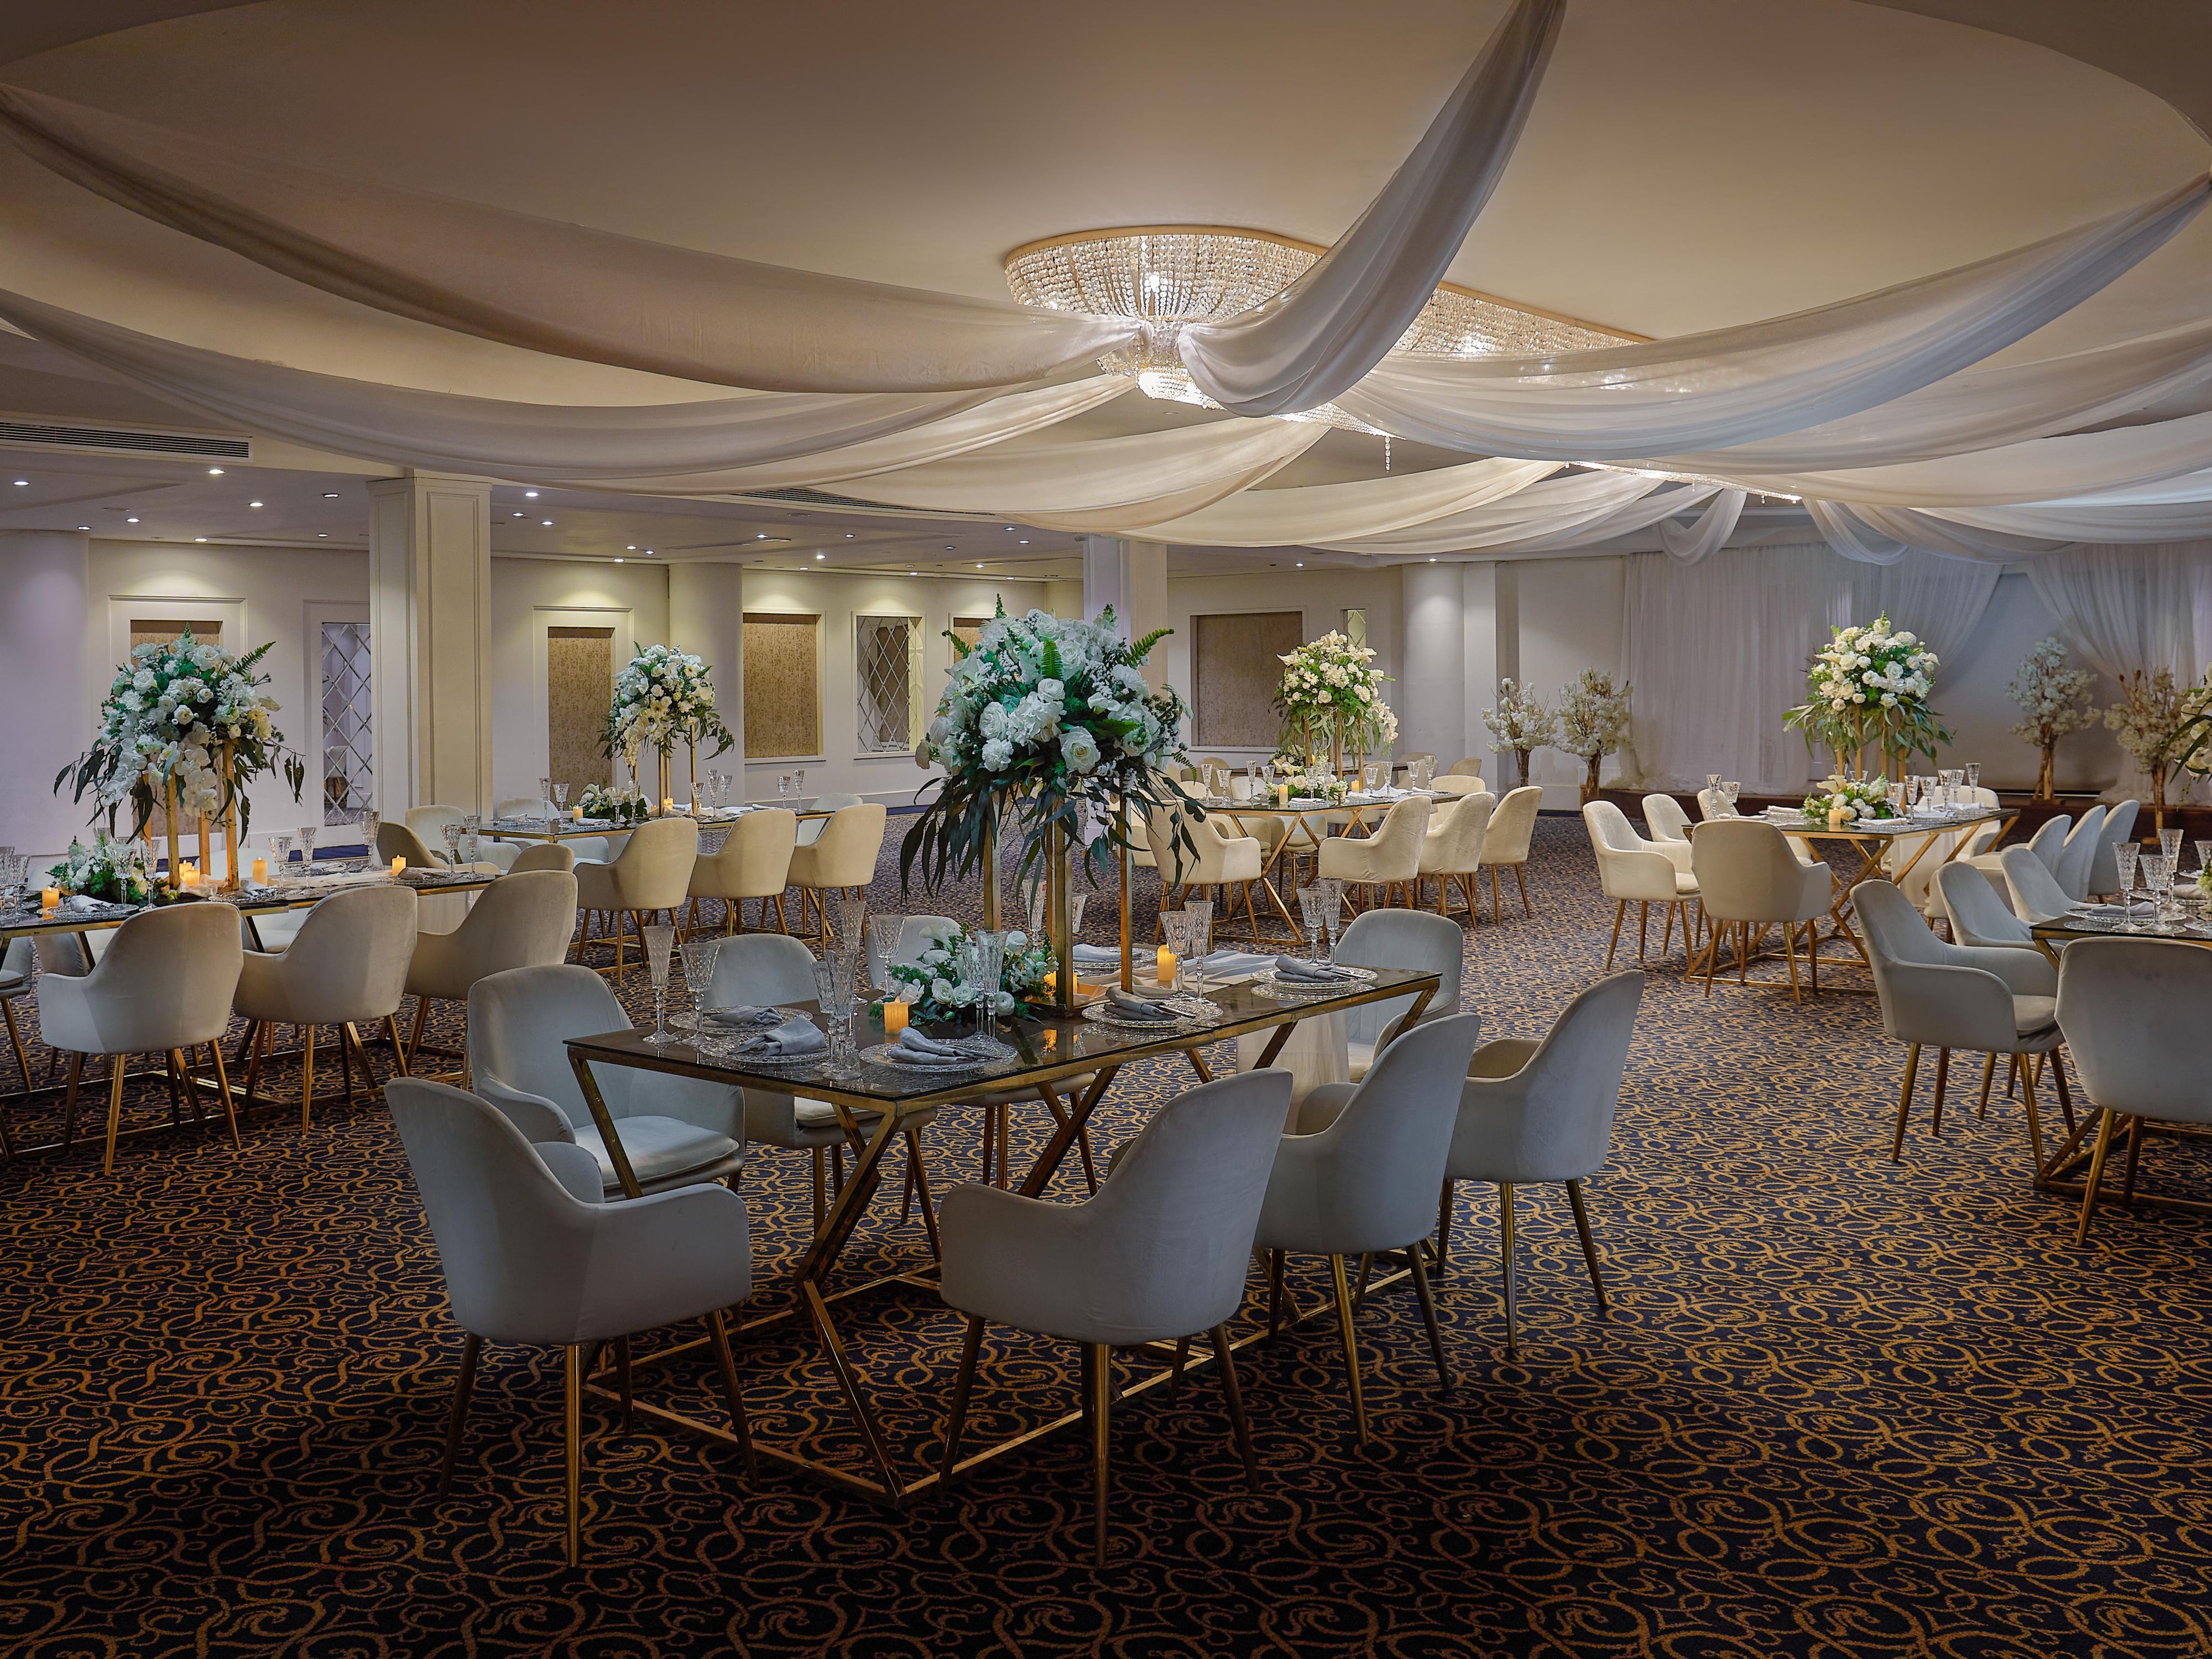 Plan your dream wedding at Holiday Inn Cairo Maadi and check out the special venue that caters all your needs. Our talented experts are delighted to take care of all the details with devotion to make your event as perfect as it should be.

For more details, kindly connect with the banquet team.